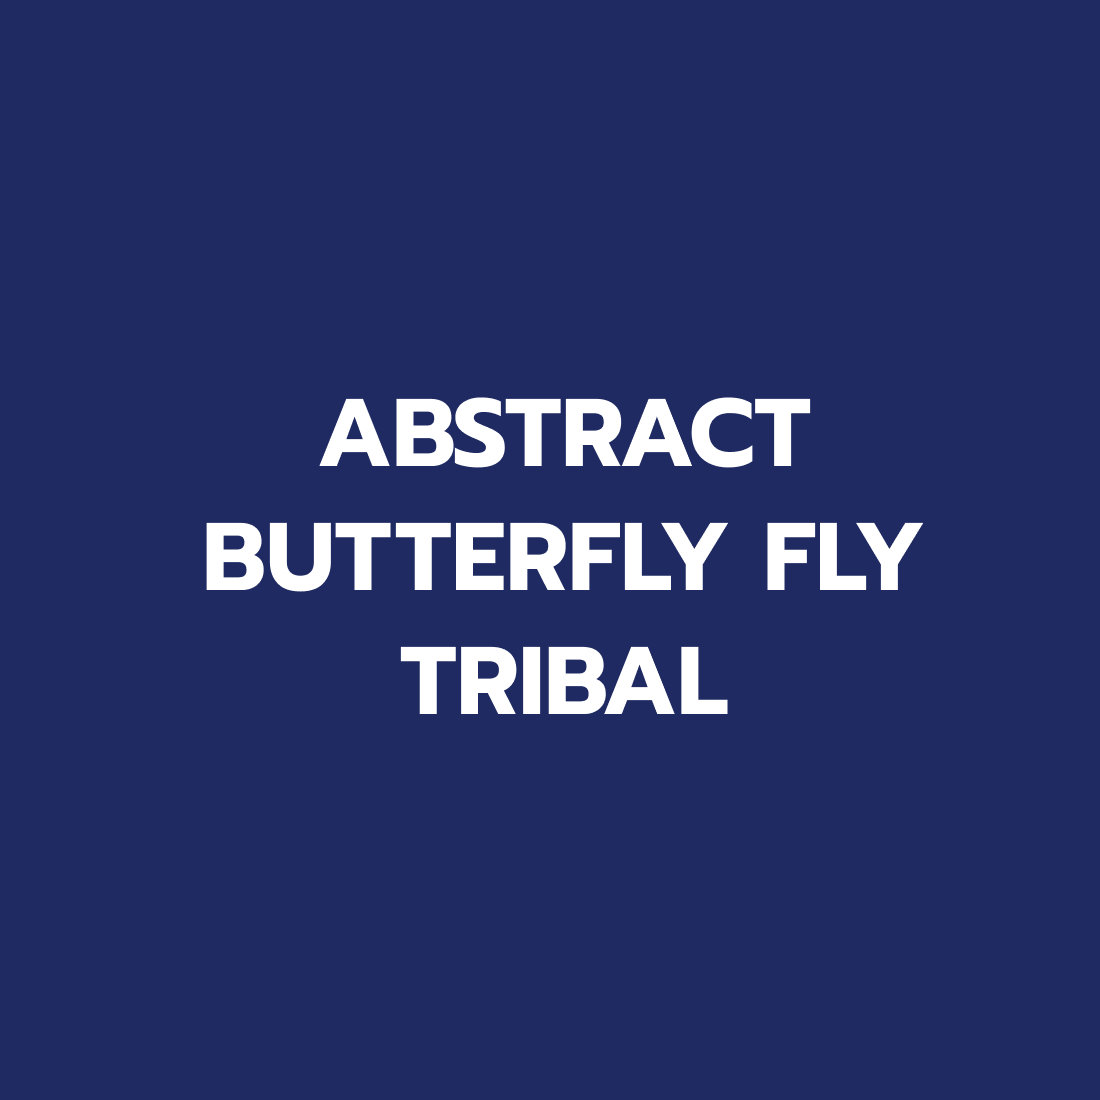 Abstract Butterfly Fly Tribal preview image.